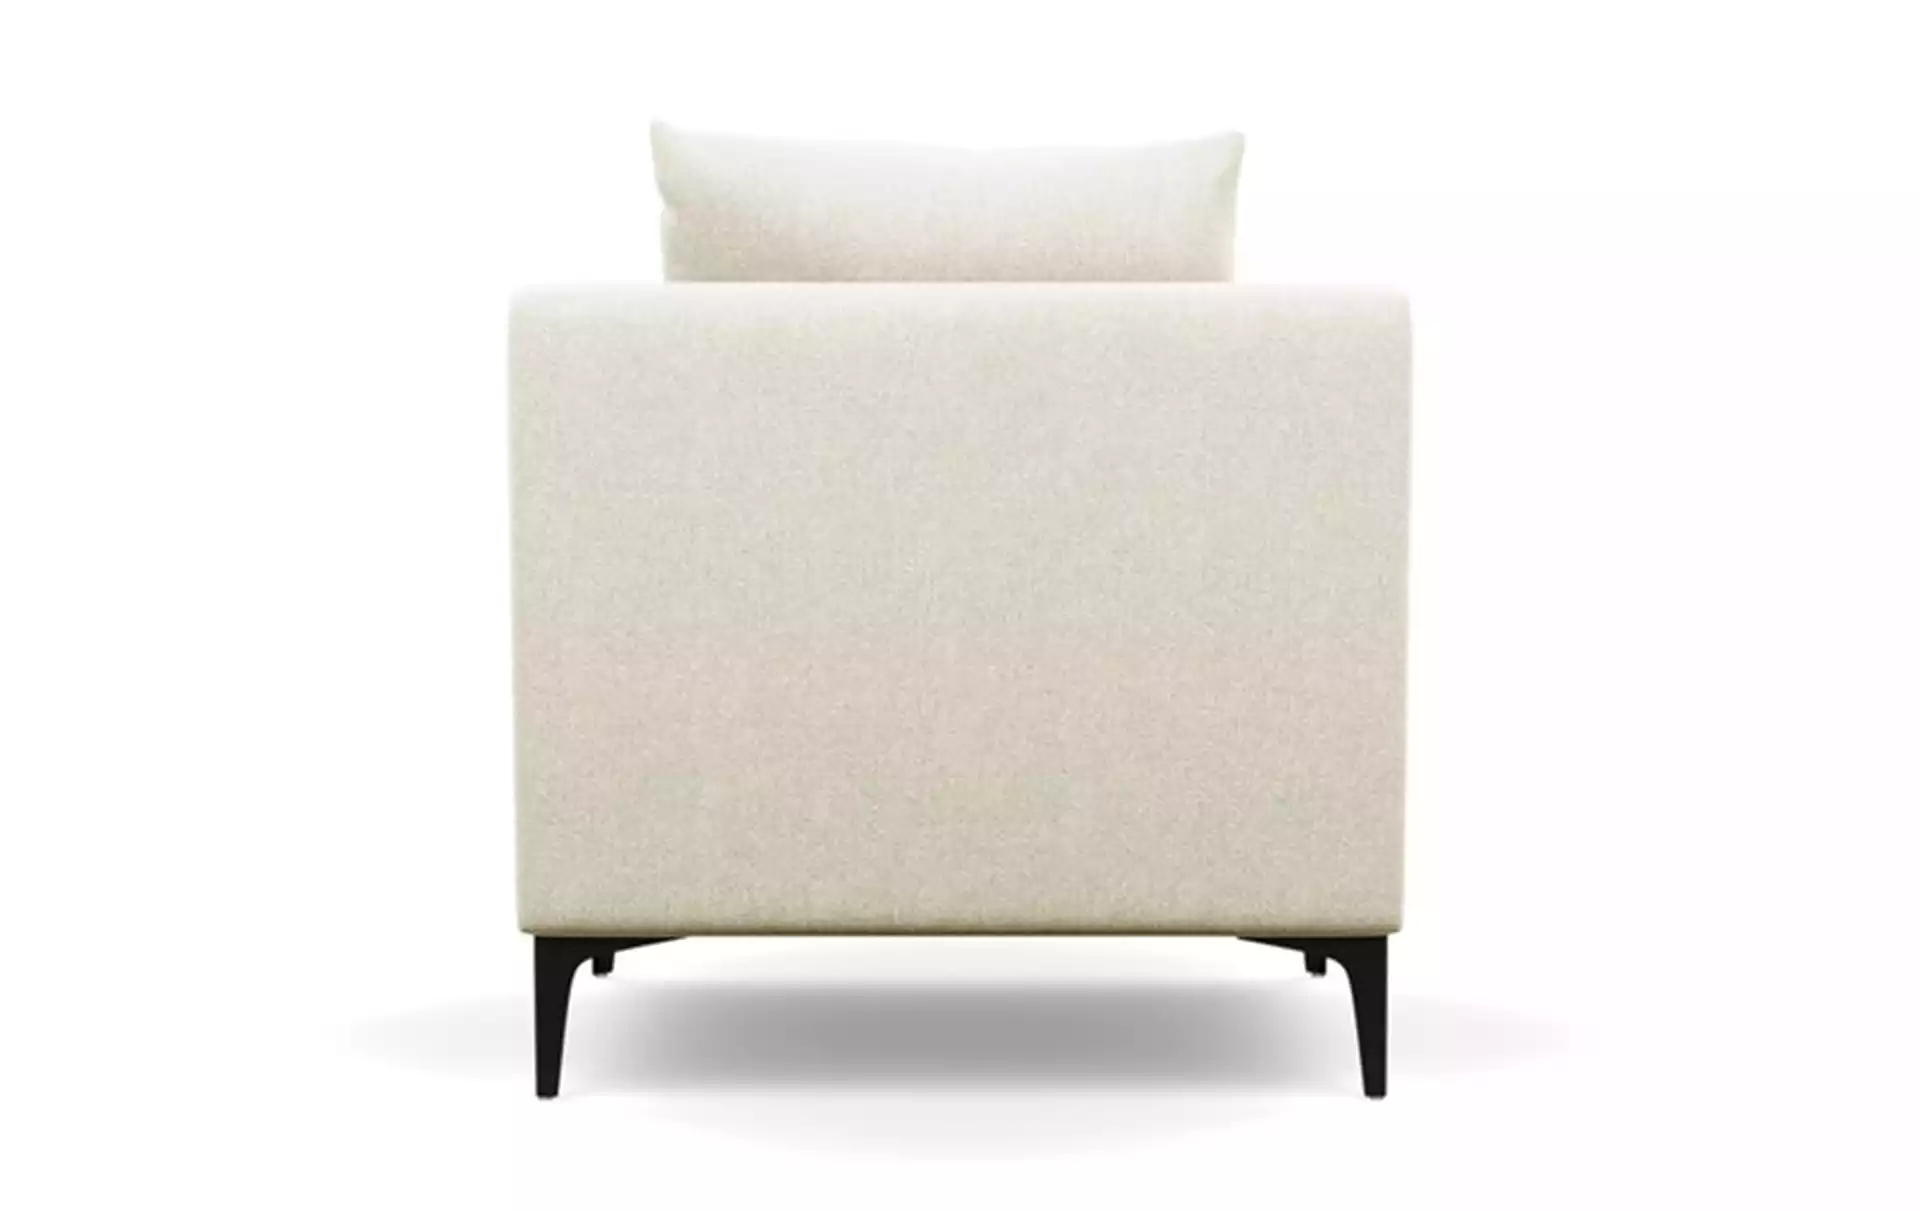 Sloan Petite Chair with White Vanilla Fabric and Matte Black legs